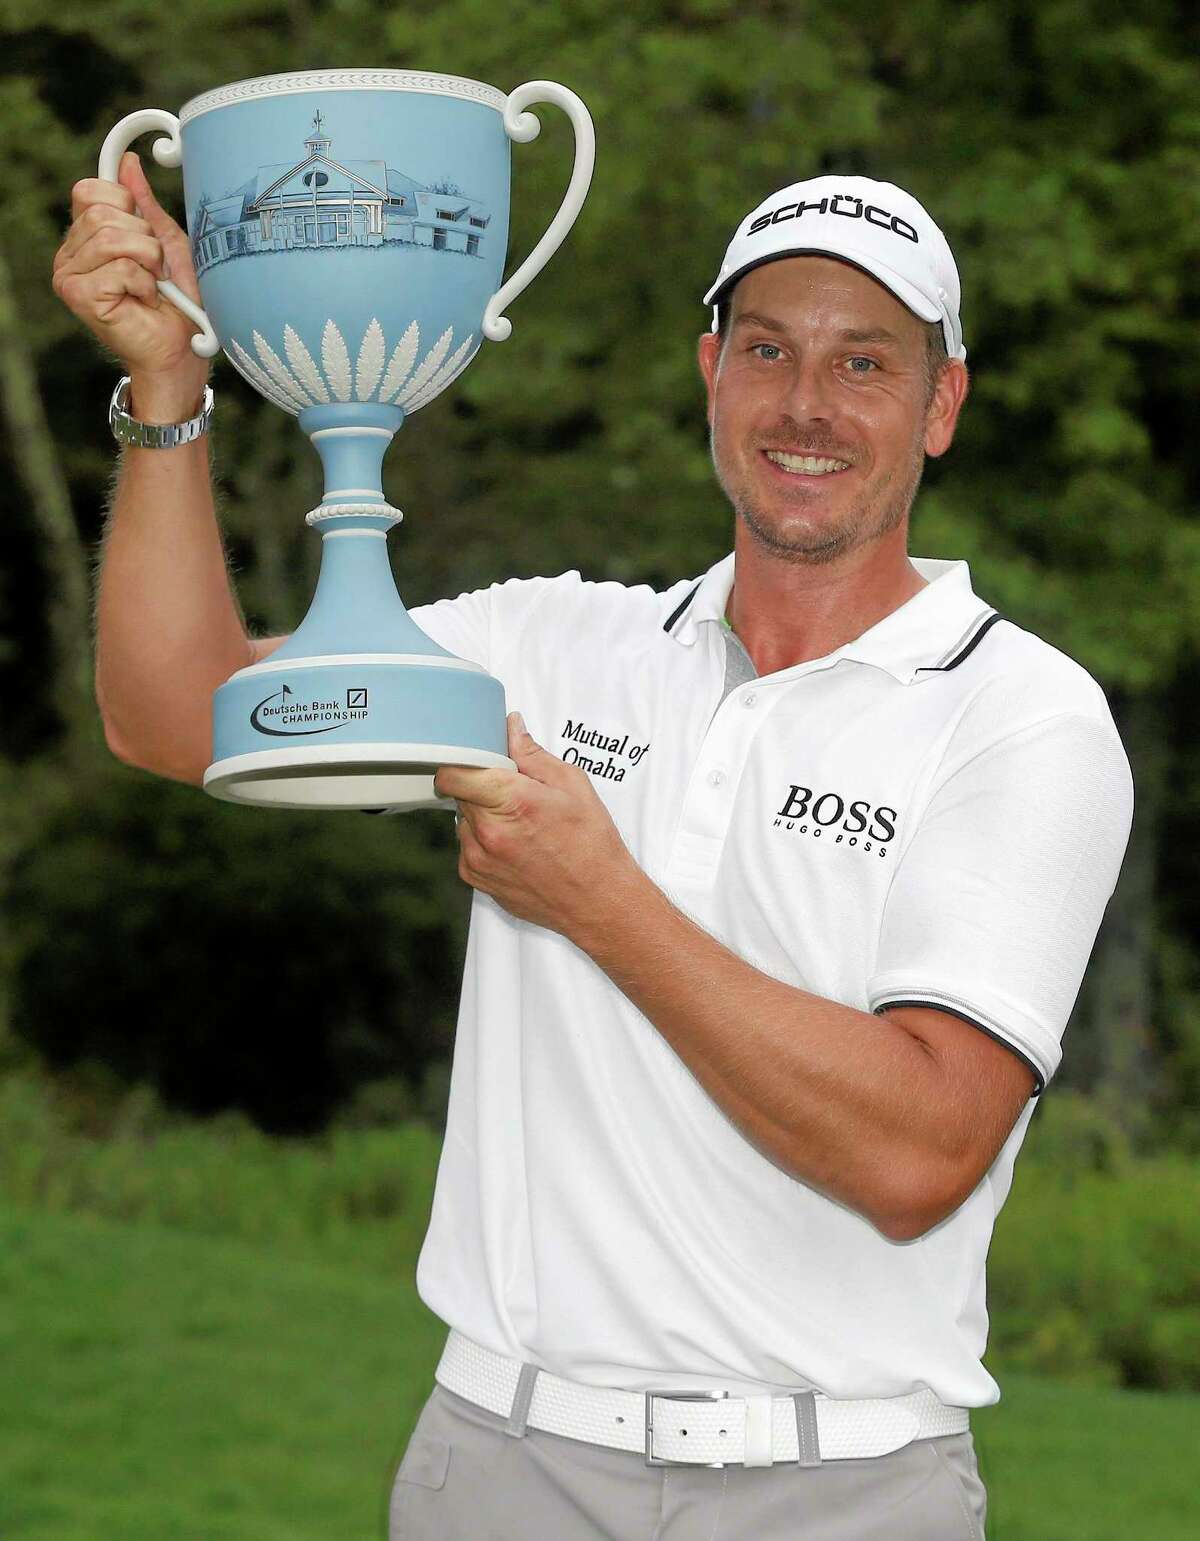 Henrik Stenson poses with the trophy after winning the Deutsche Bank Championship in Norton, Mass., on Monday.